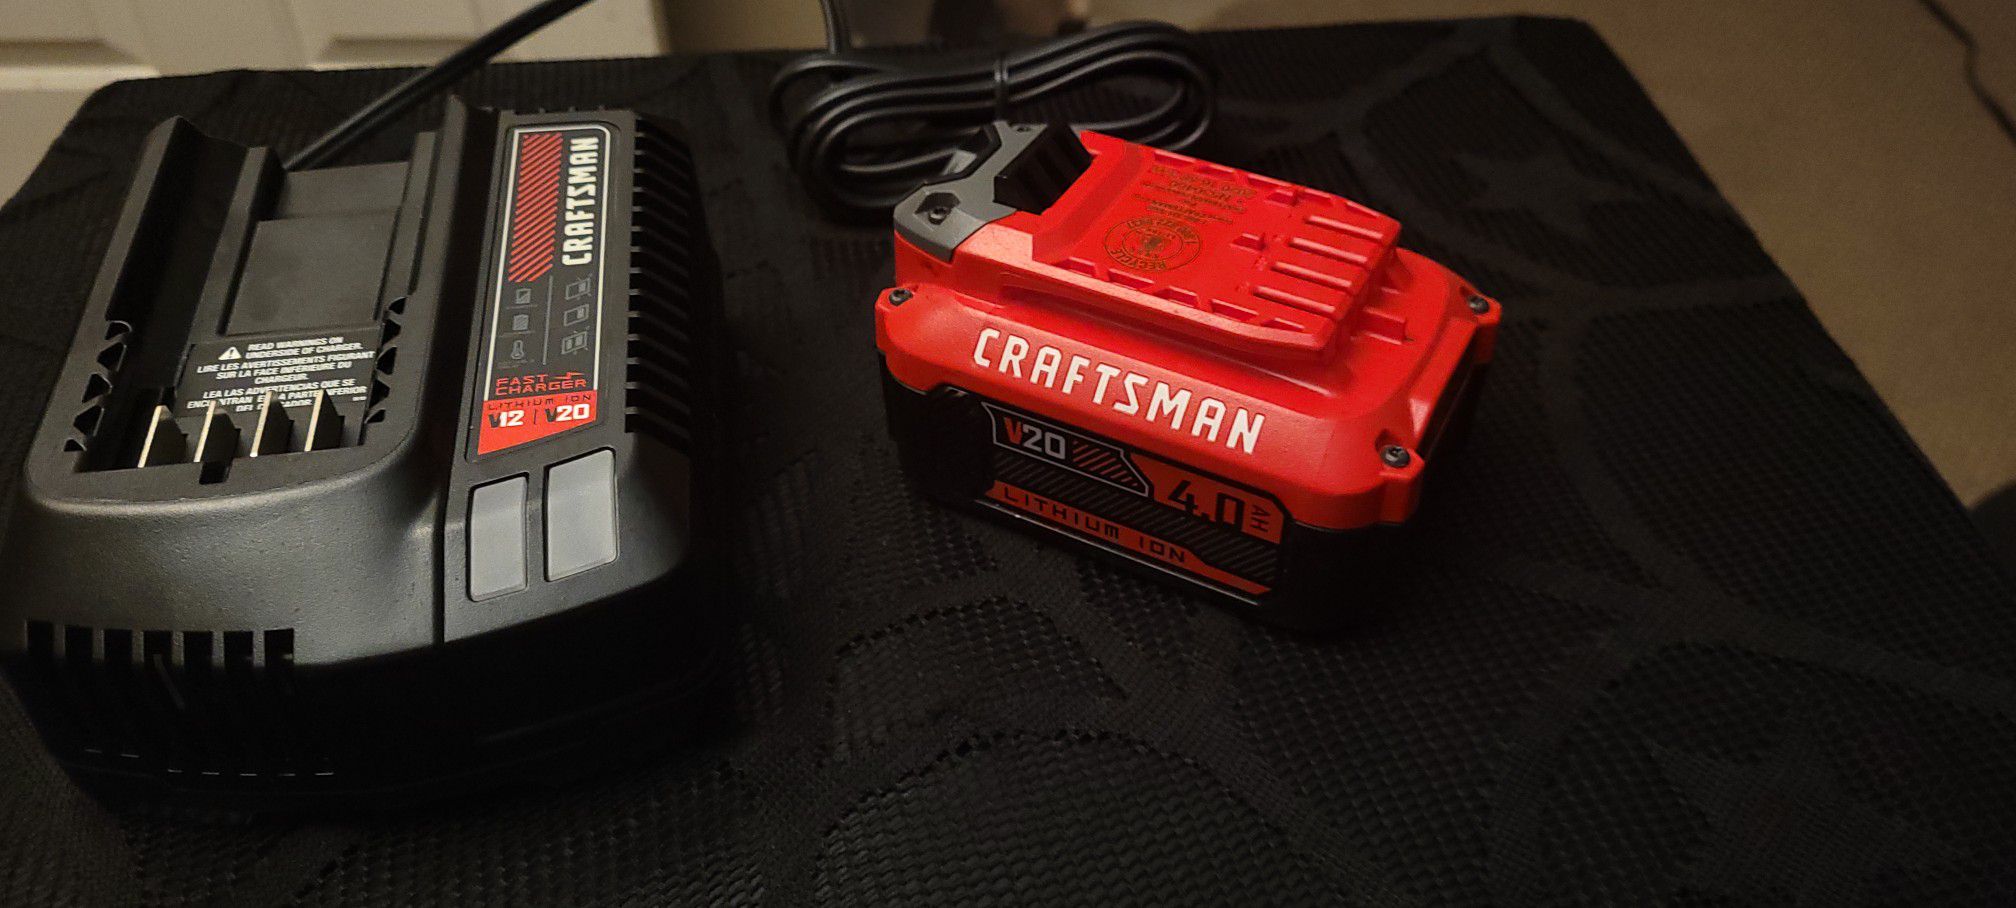 CRAFTSMAN V20 20-Volt Max 4 Amp-Hour Lithium Power Tool Battery Kit (Charger Included) - Like New BLACK FRIDAY STEAL!